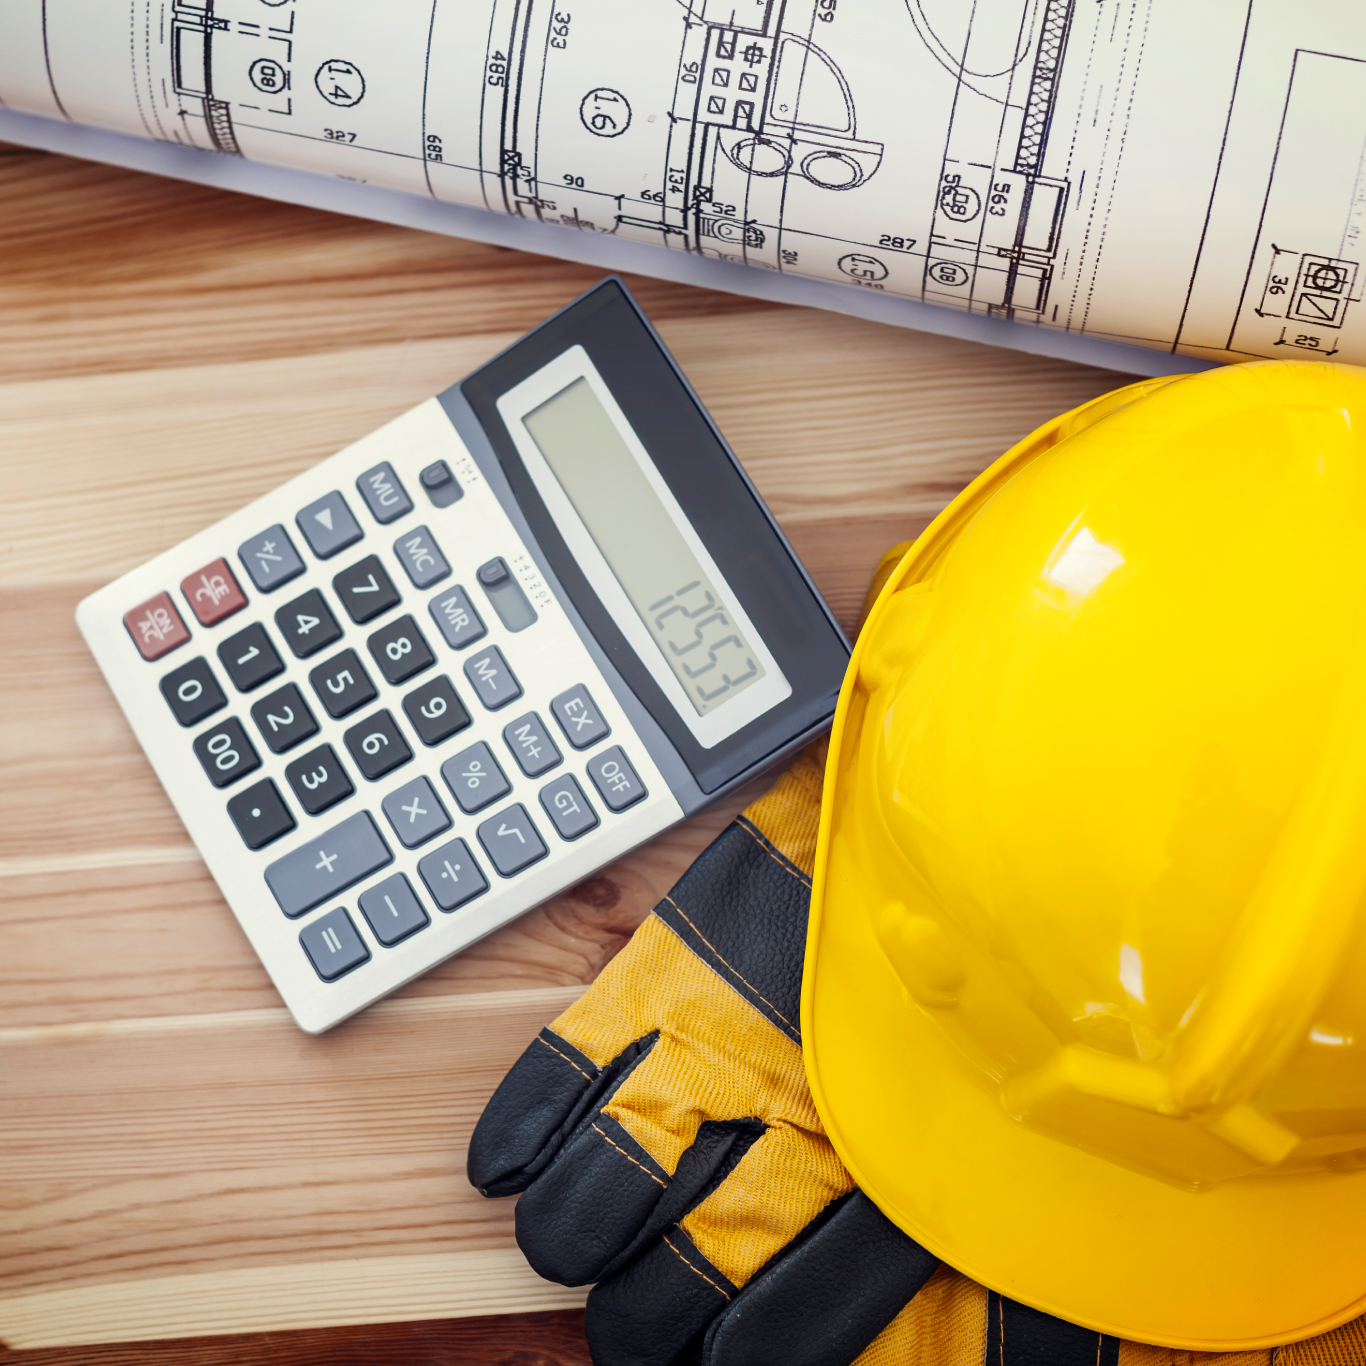 Photo of a hard hat and calculator on a desk next to some plans